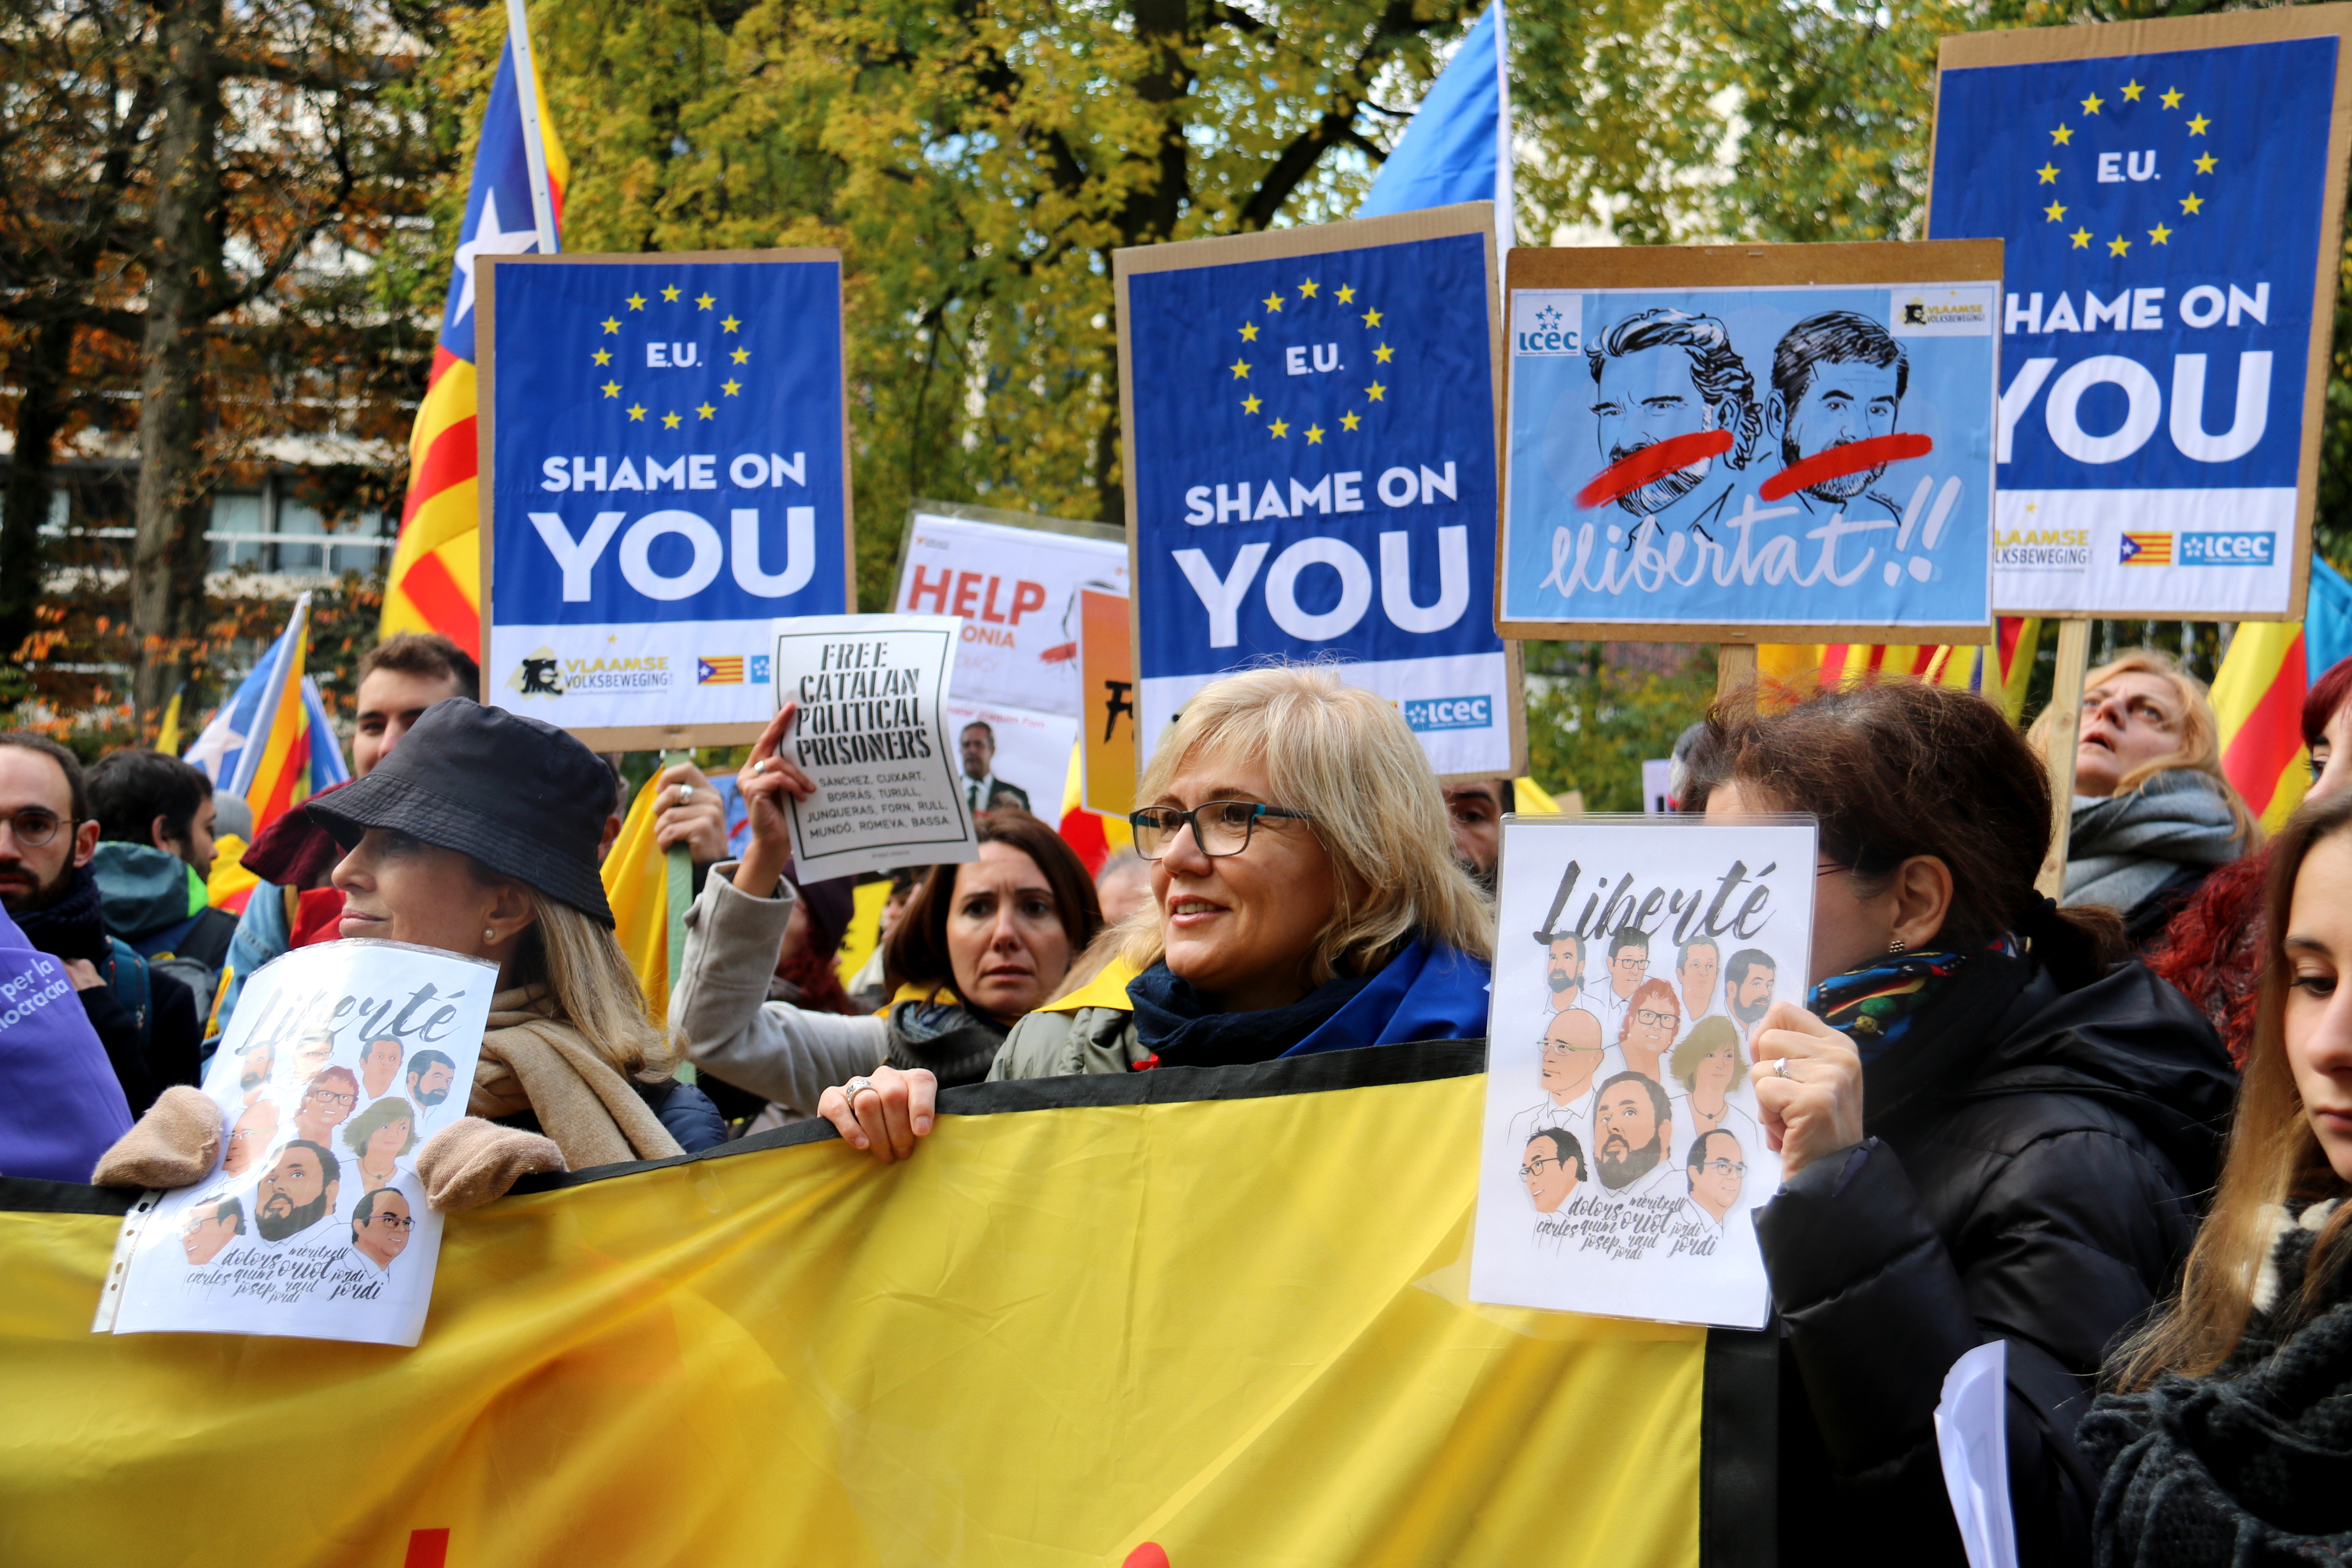 Demonstrators took to the streets in Brussels to demand the release of imprisoned Catalan leaders on November 12 (by Laura Pous)